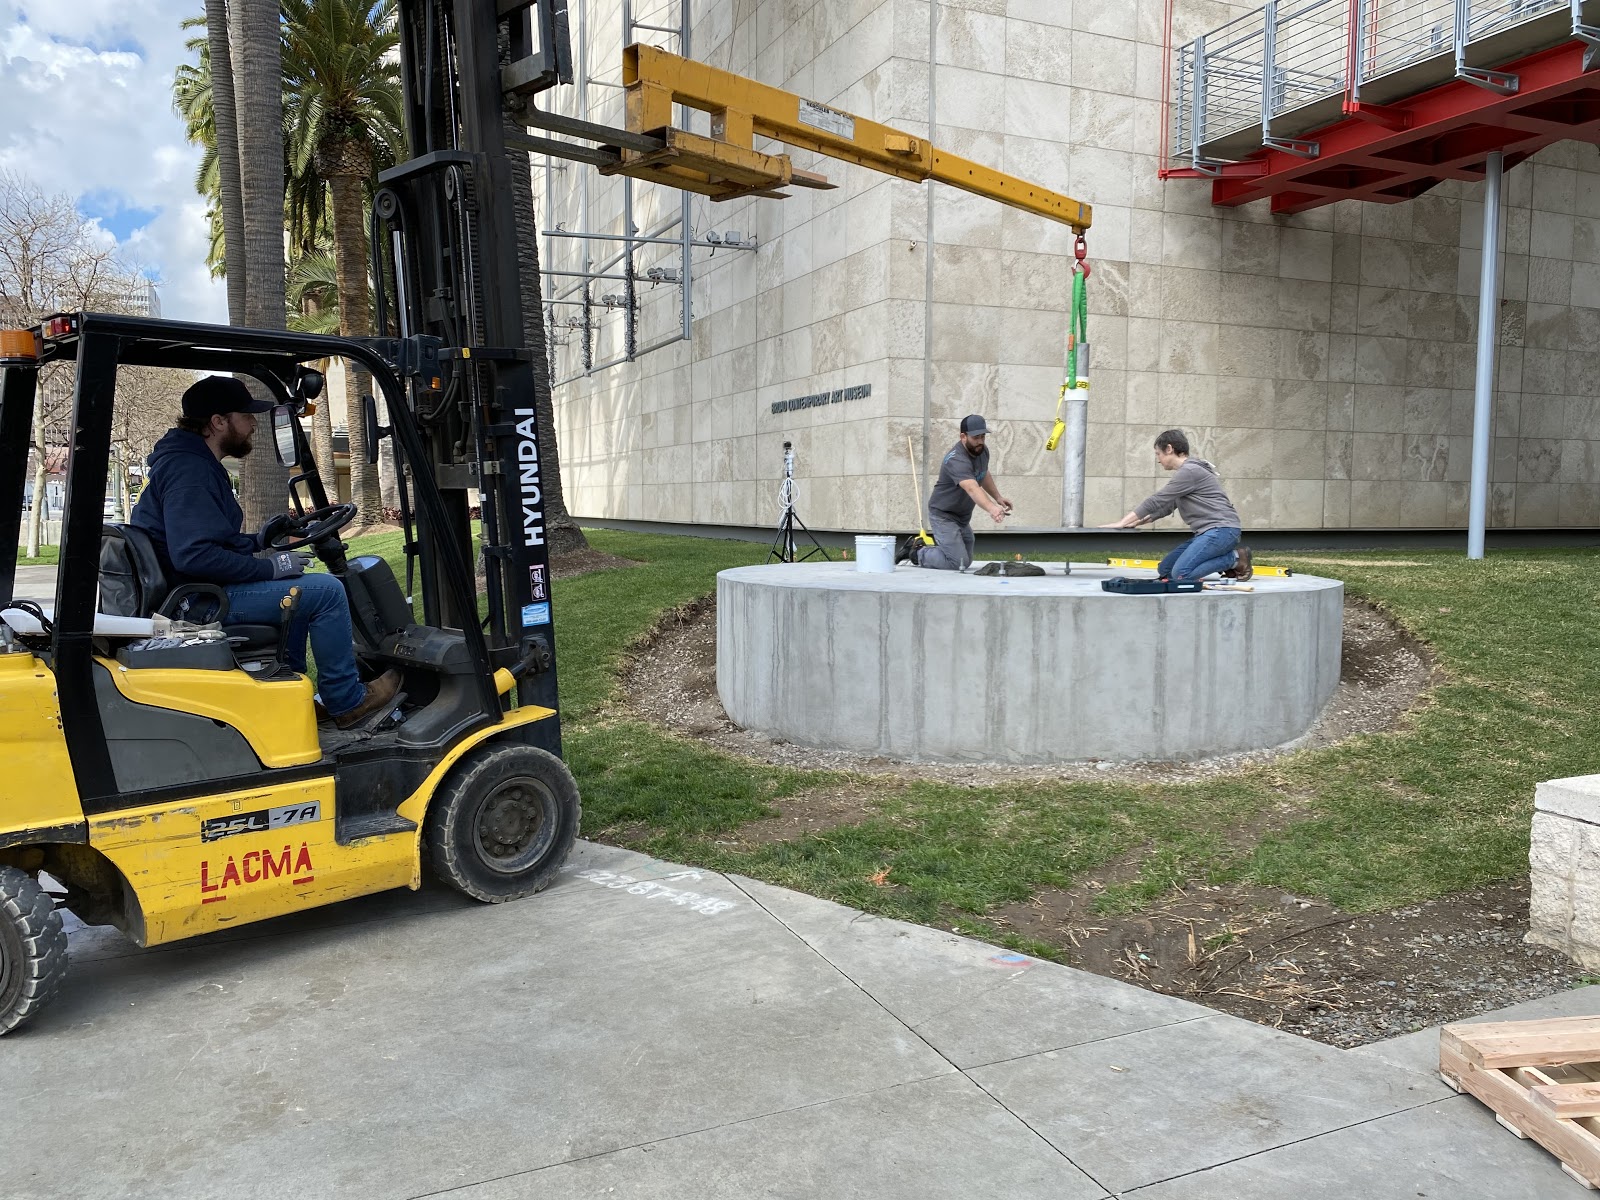 The day before the sculpture arrived, we installed its mount onto the concrete pedestal. We worked closely with Manager of Gallery Construction Jeff Young, to embed anchor bolts in the exact locations needed in the concrete pad as it was poured. From left to right Jordan Mesavage, Luke Boehnke, and Julia Latané. Photo by Elspeth Patient